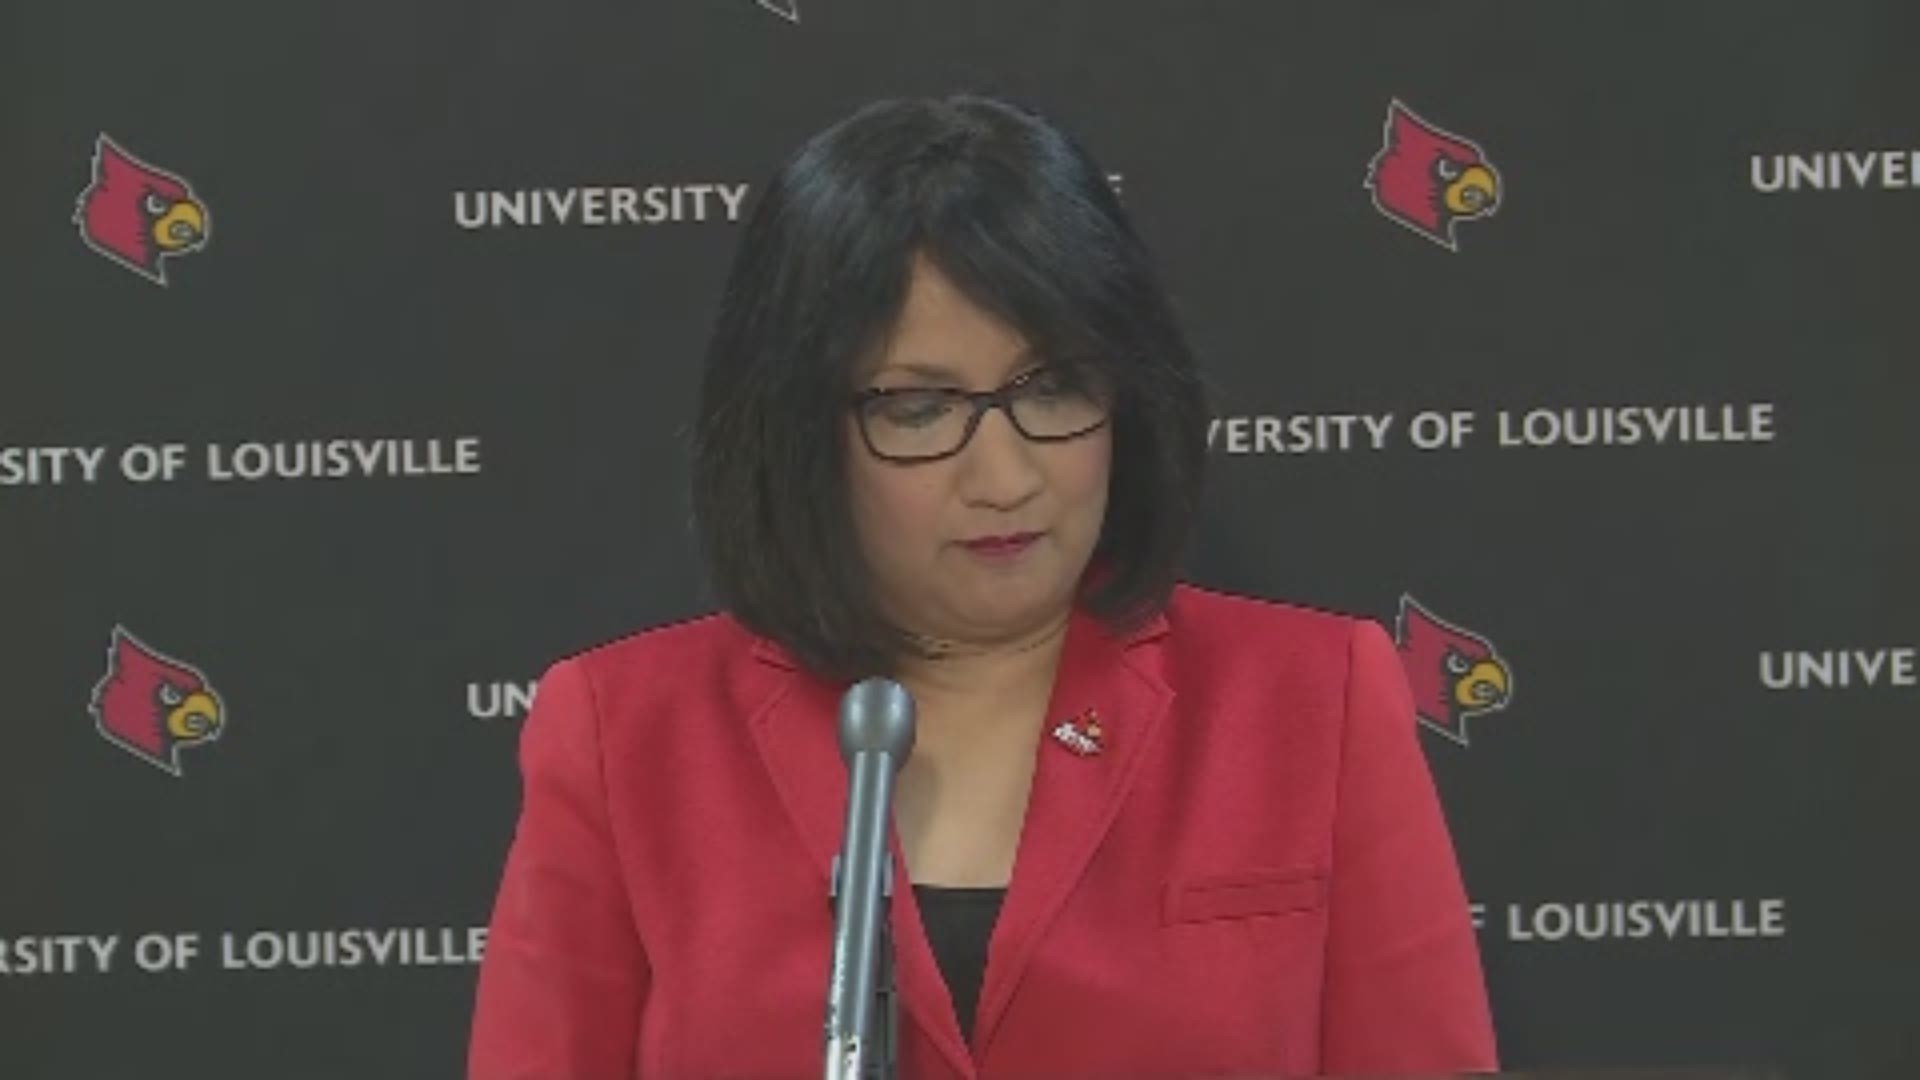 UofL Pres. Bendapudi announces name change to stadium after Schnatter uses racial slur